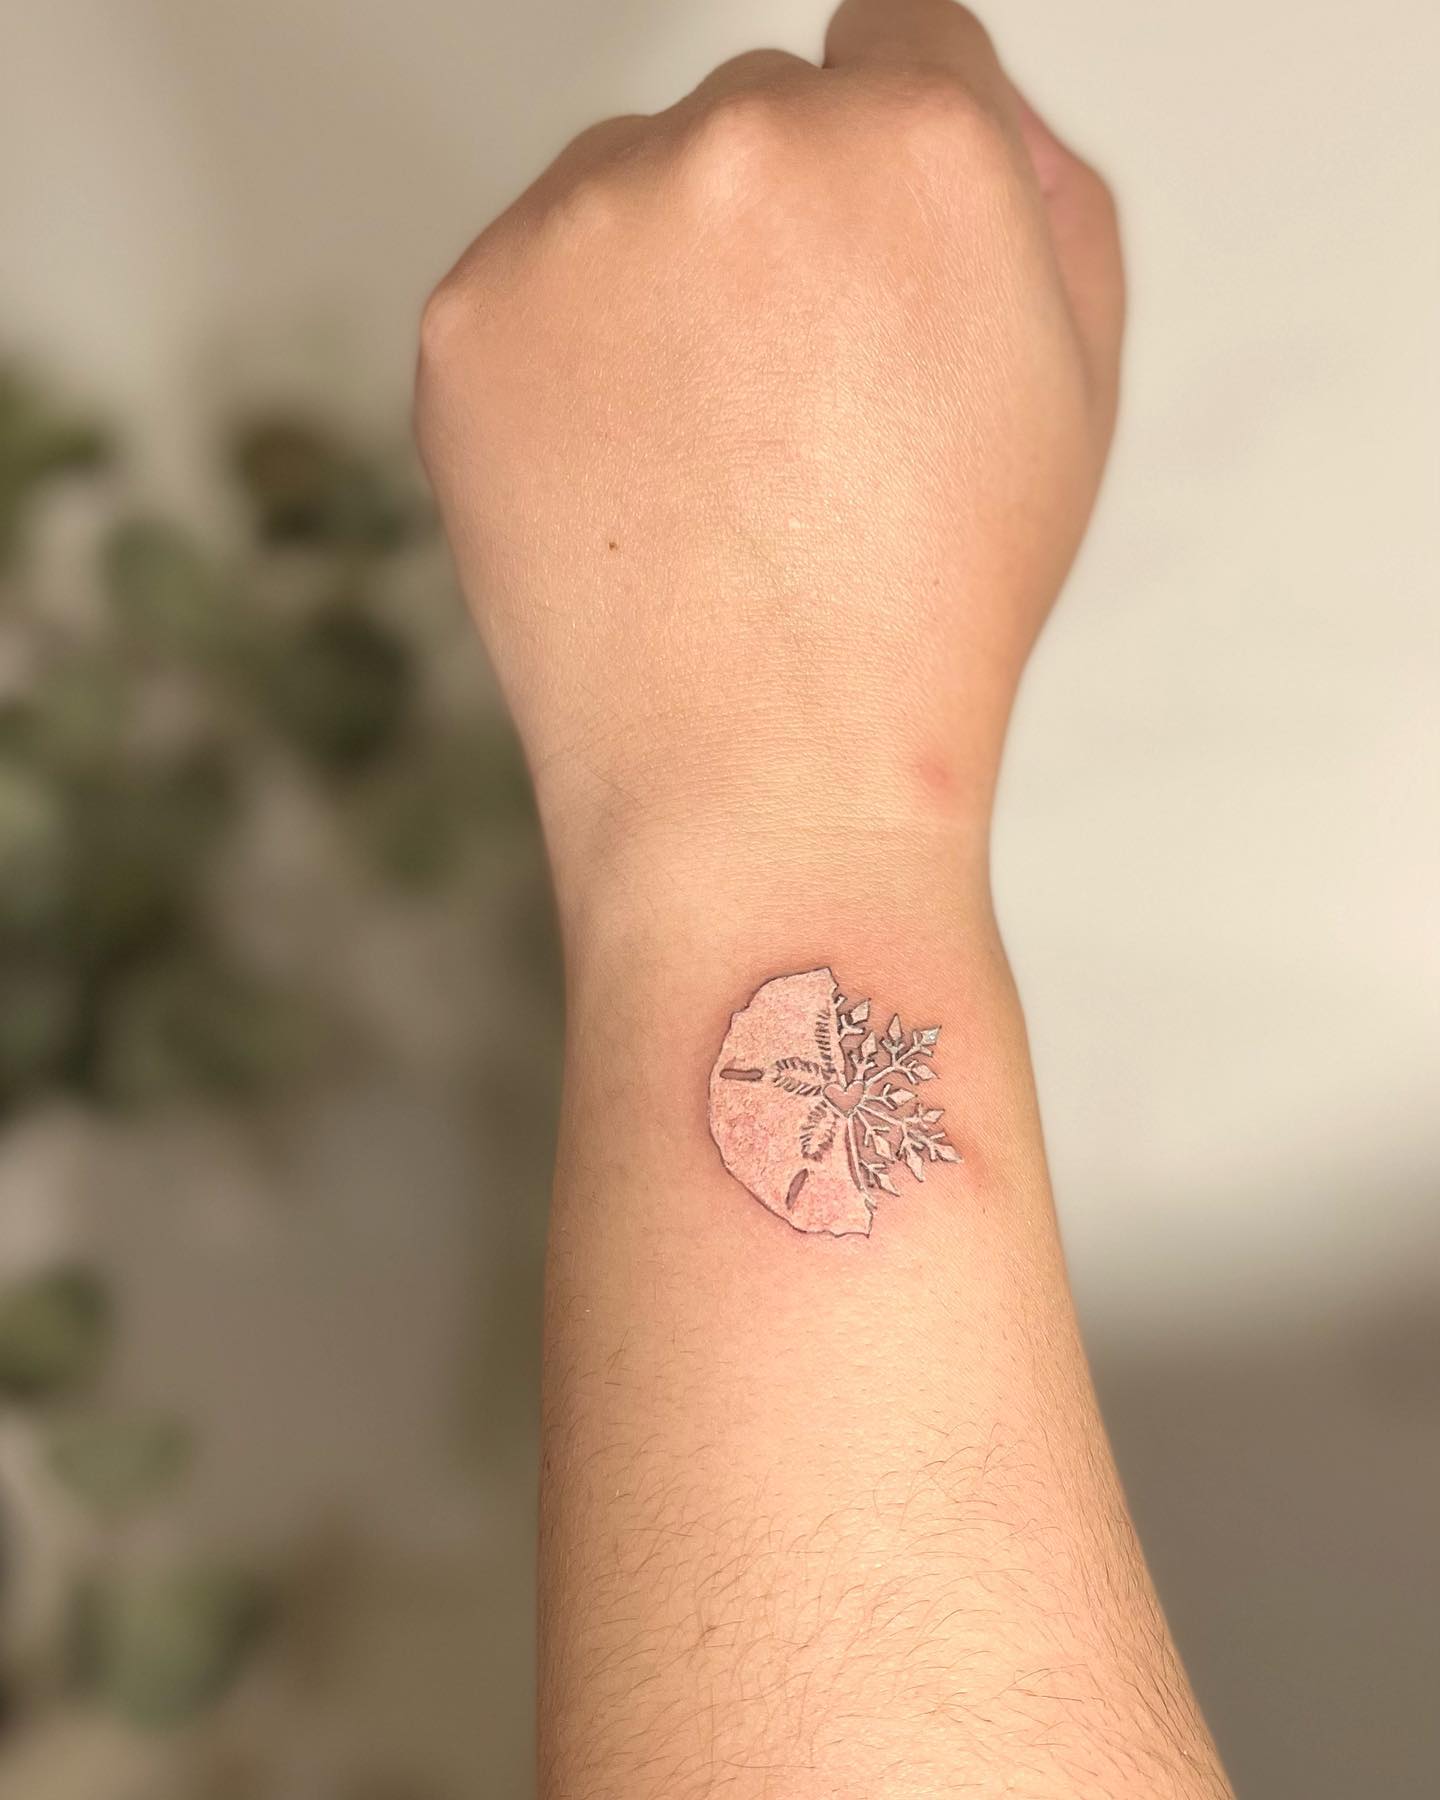 I love the way the snowflake appears from the ice. It's like a fresh blanket of snow, which is exactly what Christmas is about. This tattoo will warm your heart, for sure.